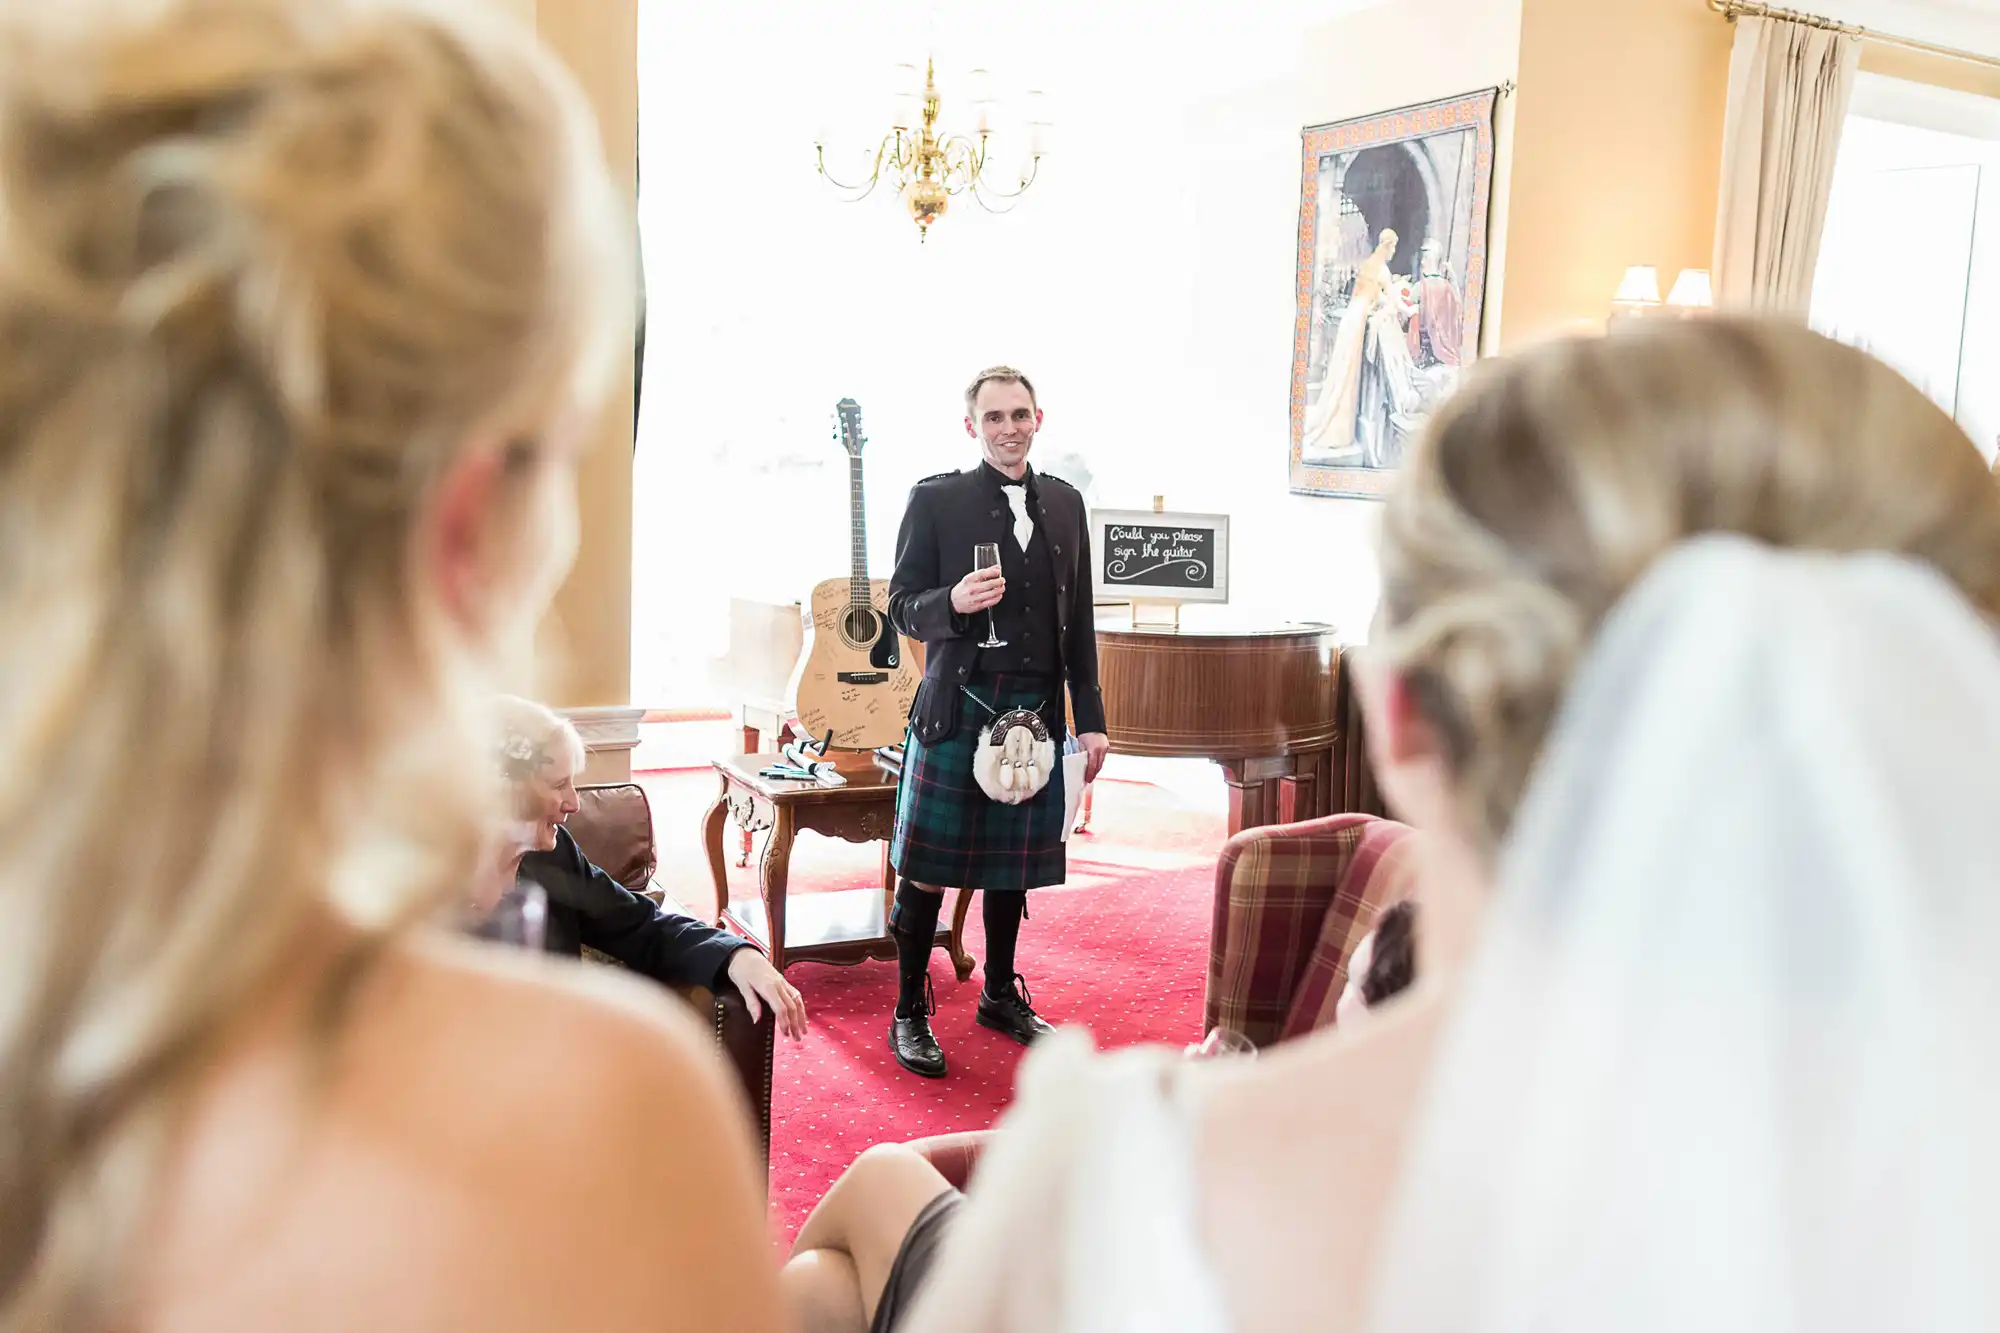 A groom in a kilt gives a speech to a bride and guests in an elegant room with a chandelier and classical guitars in the background.